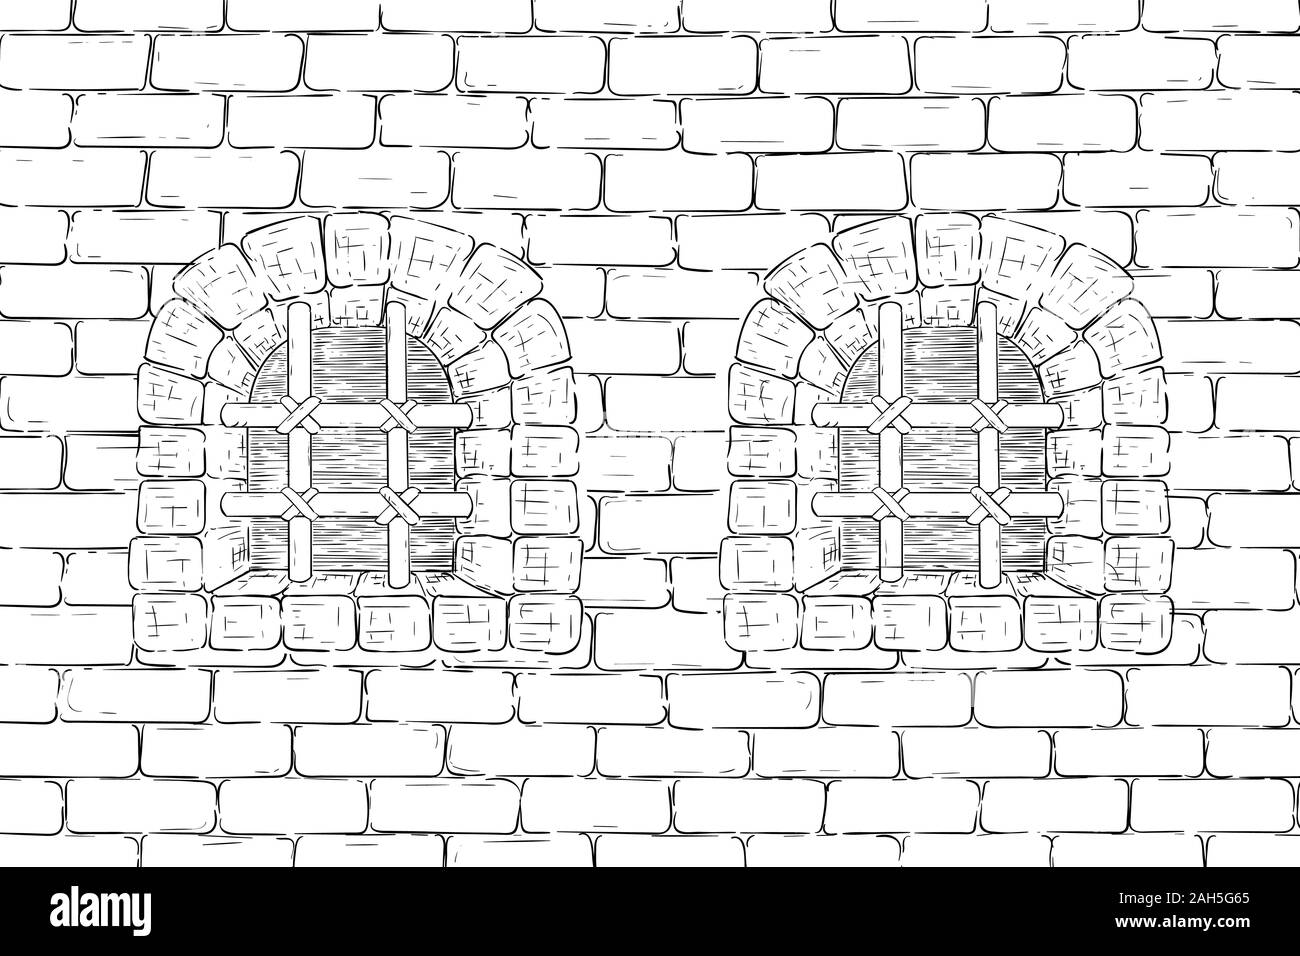 Old brick wall with barred windows. Hand drawing, vintage sketch Stock Vector